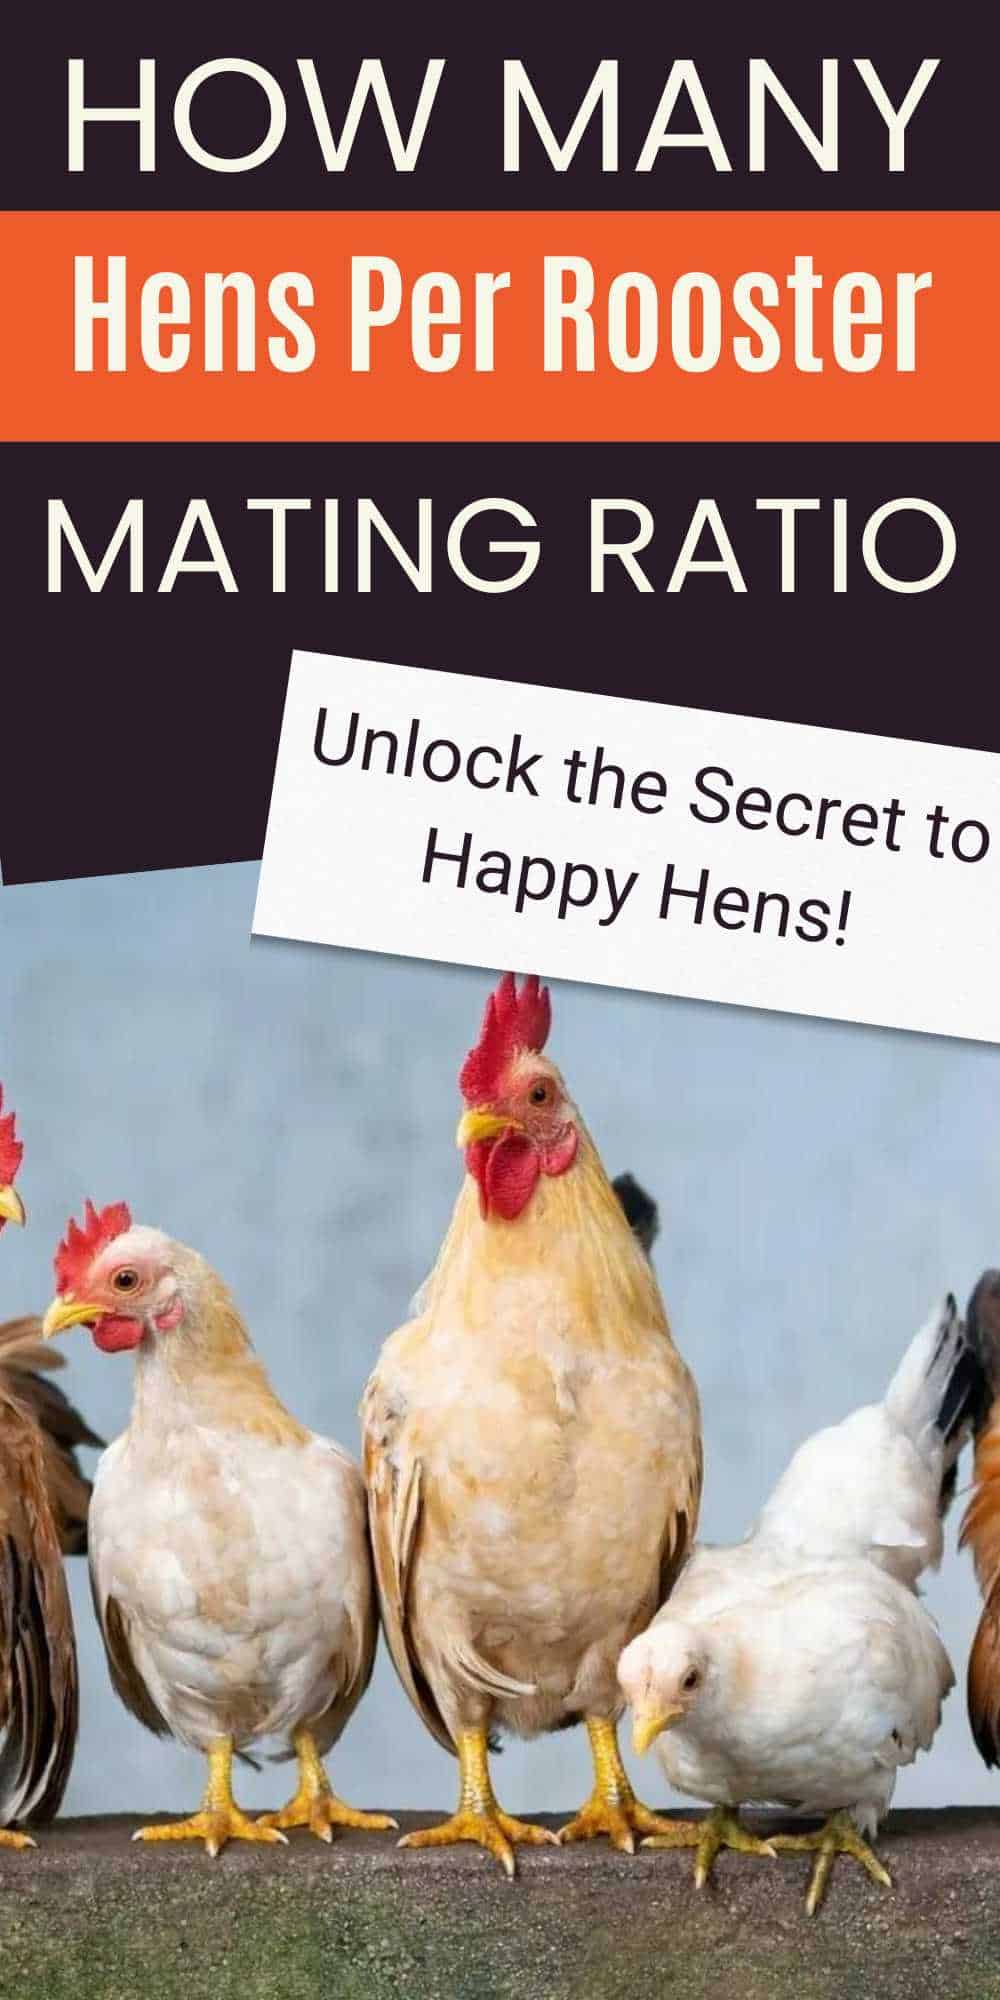 How Many Hens per Rooster